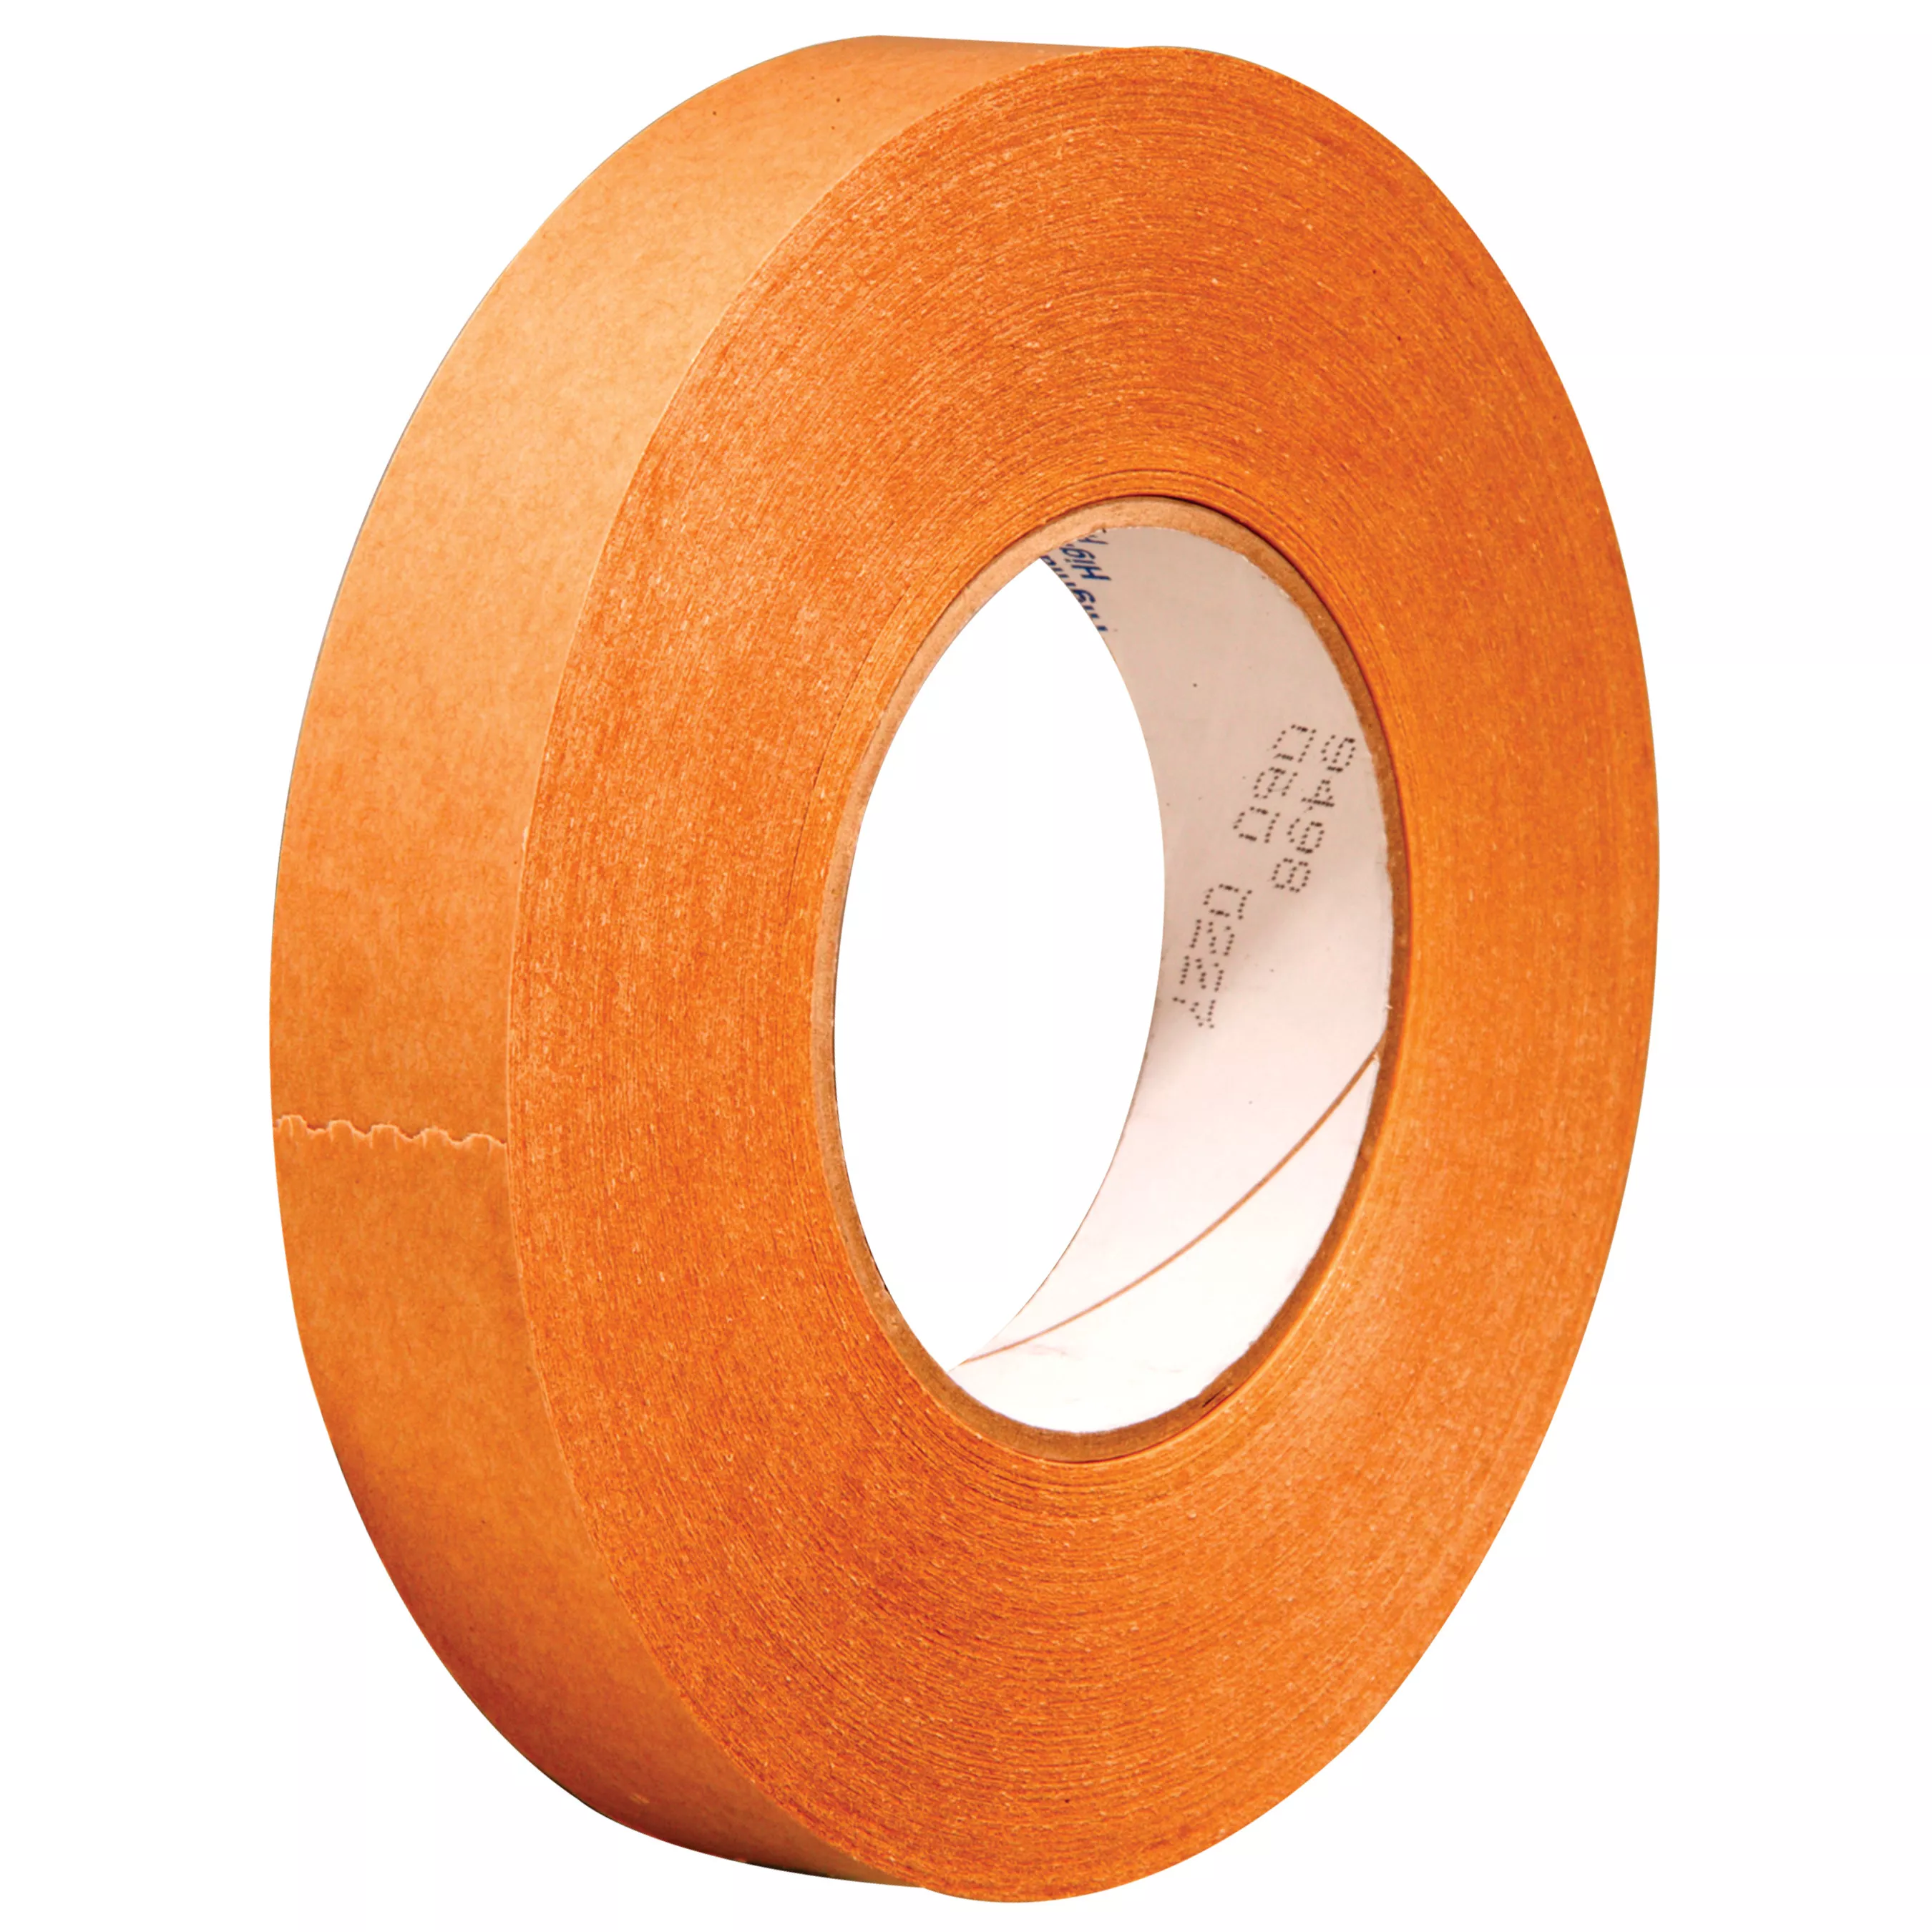 3M™ Adhesive Transfer Tape 9498, Clear, 1/2 in x 120 yd, 2 mil, 72
Roll/Case